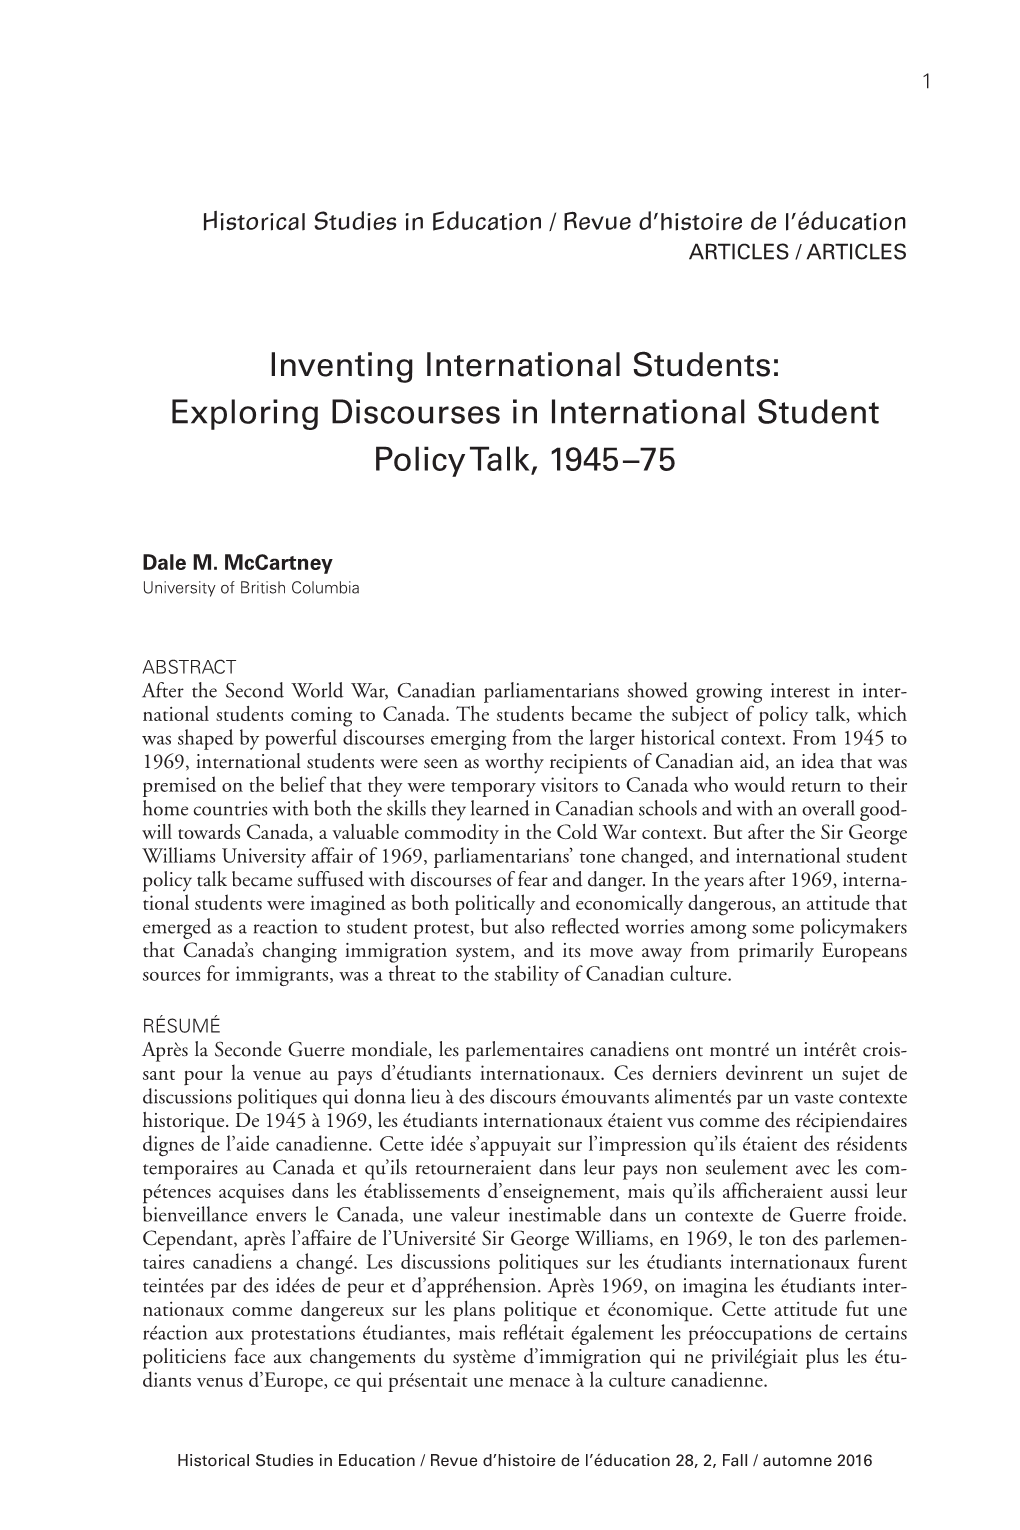 Exploring Discourses in International Student Policy Talk, 1945–75